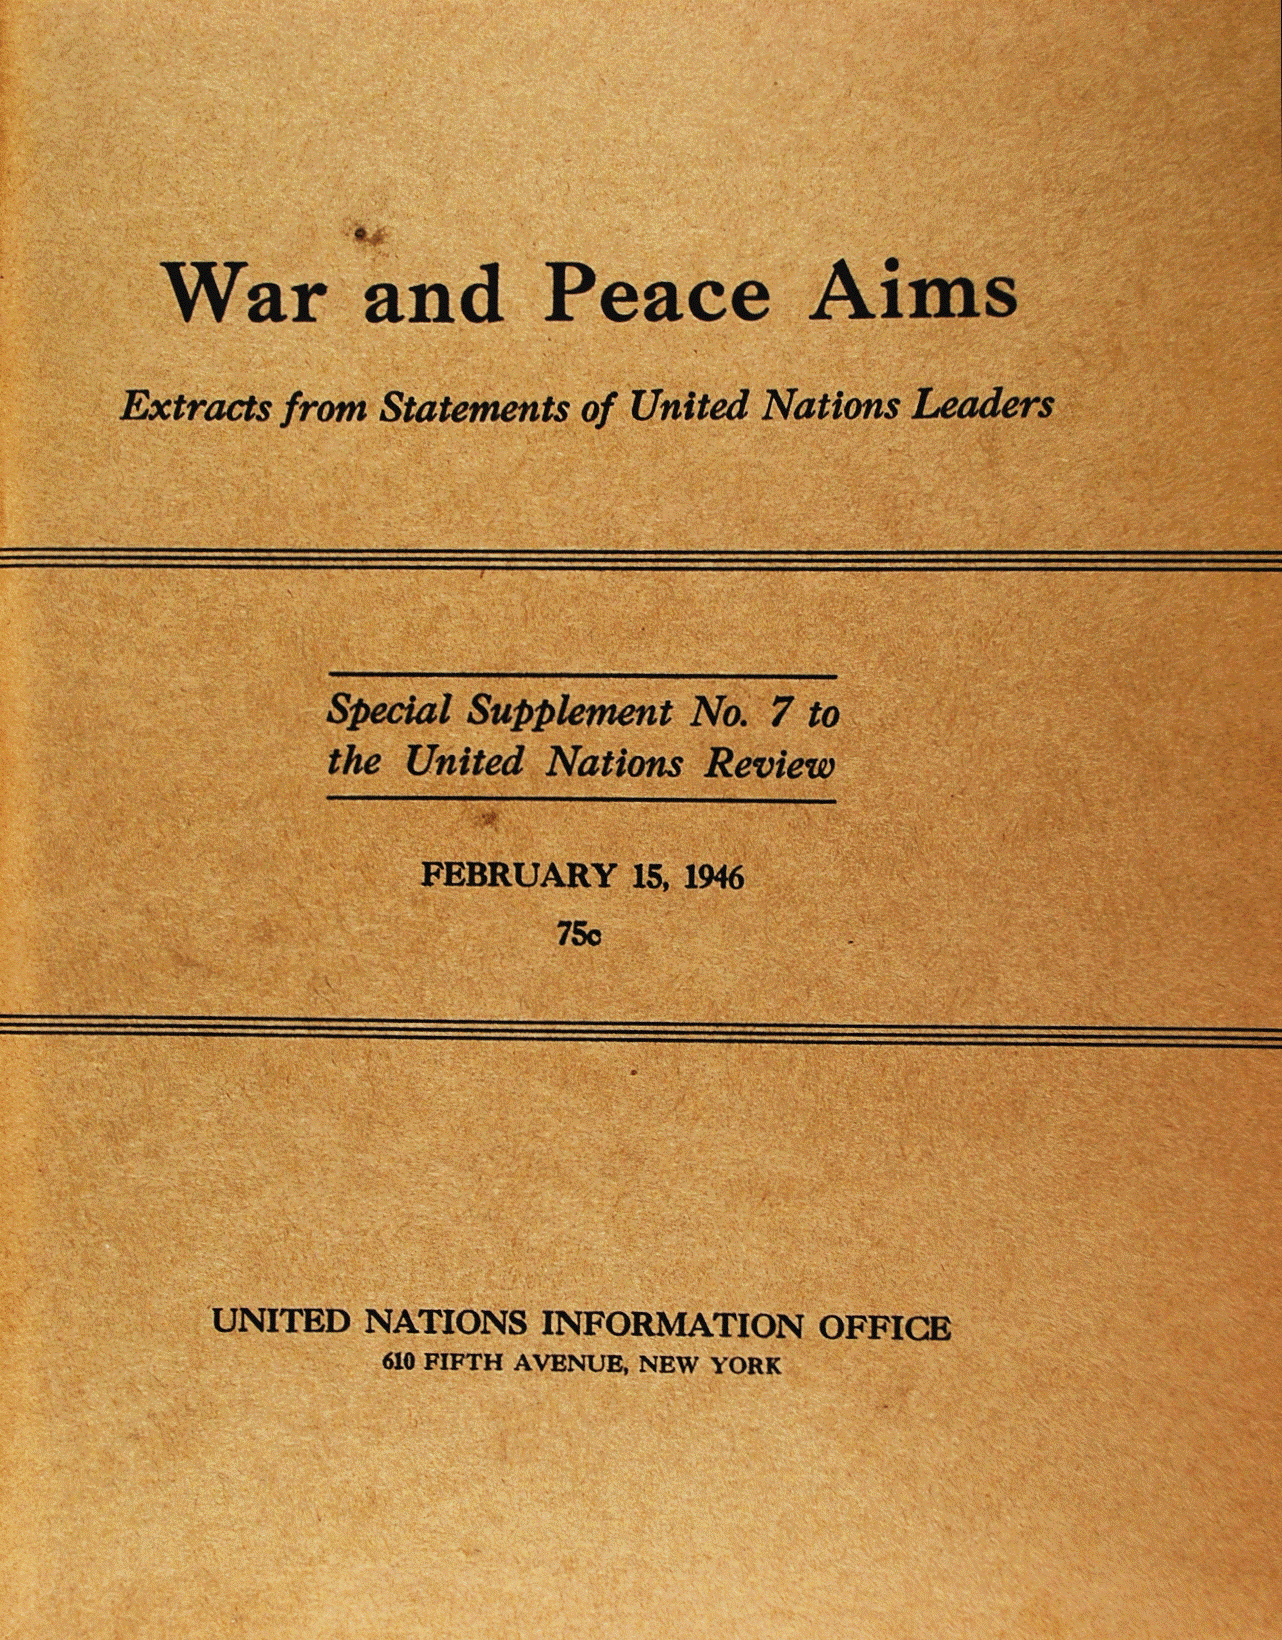 UN Origins Project Series, Part 5: Sharpening the Teeth of Peace